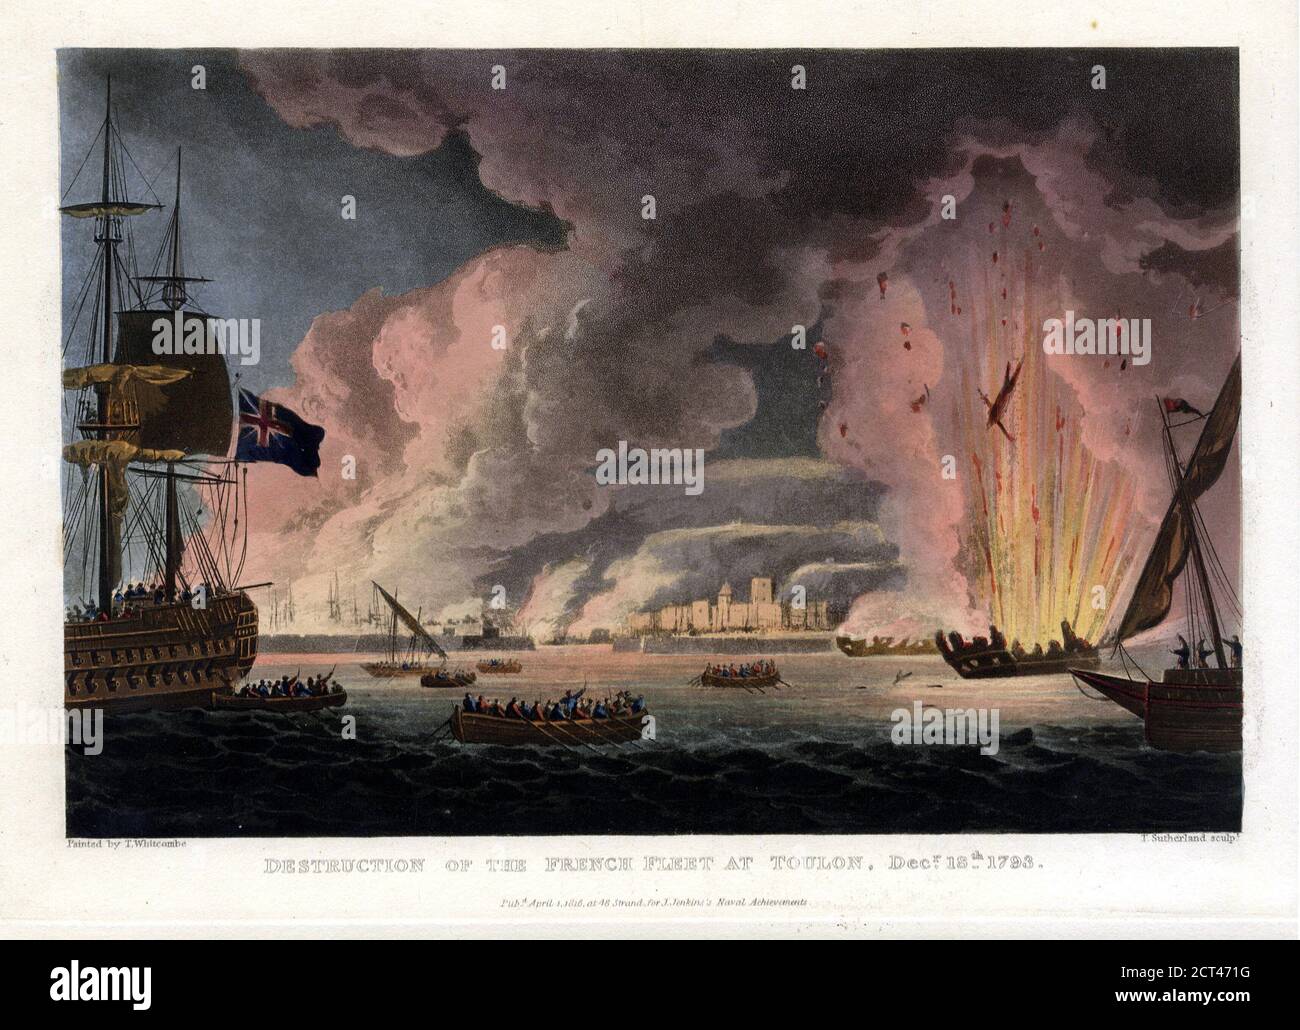 Destruction of the French Fleet at Toulon 18th December 1793. By Thomas Whitcombe (possibly 19 May 1763 – c. 1824) was a prominent British maritime painter of the Napoleonic Wars. Among his work are over 150 actions of the Royal Navy, and he exhibited at the Royal Academy, the British Institution and the Royal Society of British Artists. His pictures are highly sought after today. Stock Photo